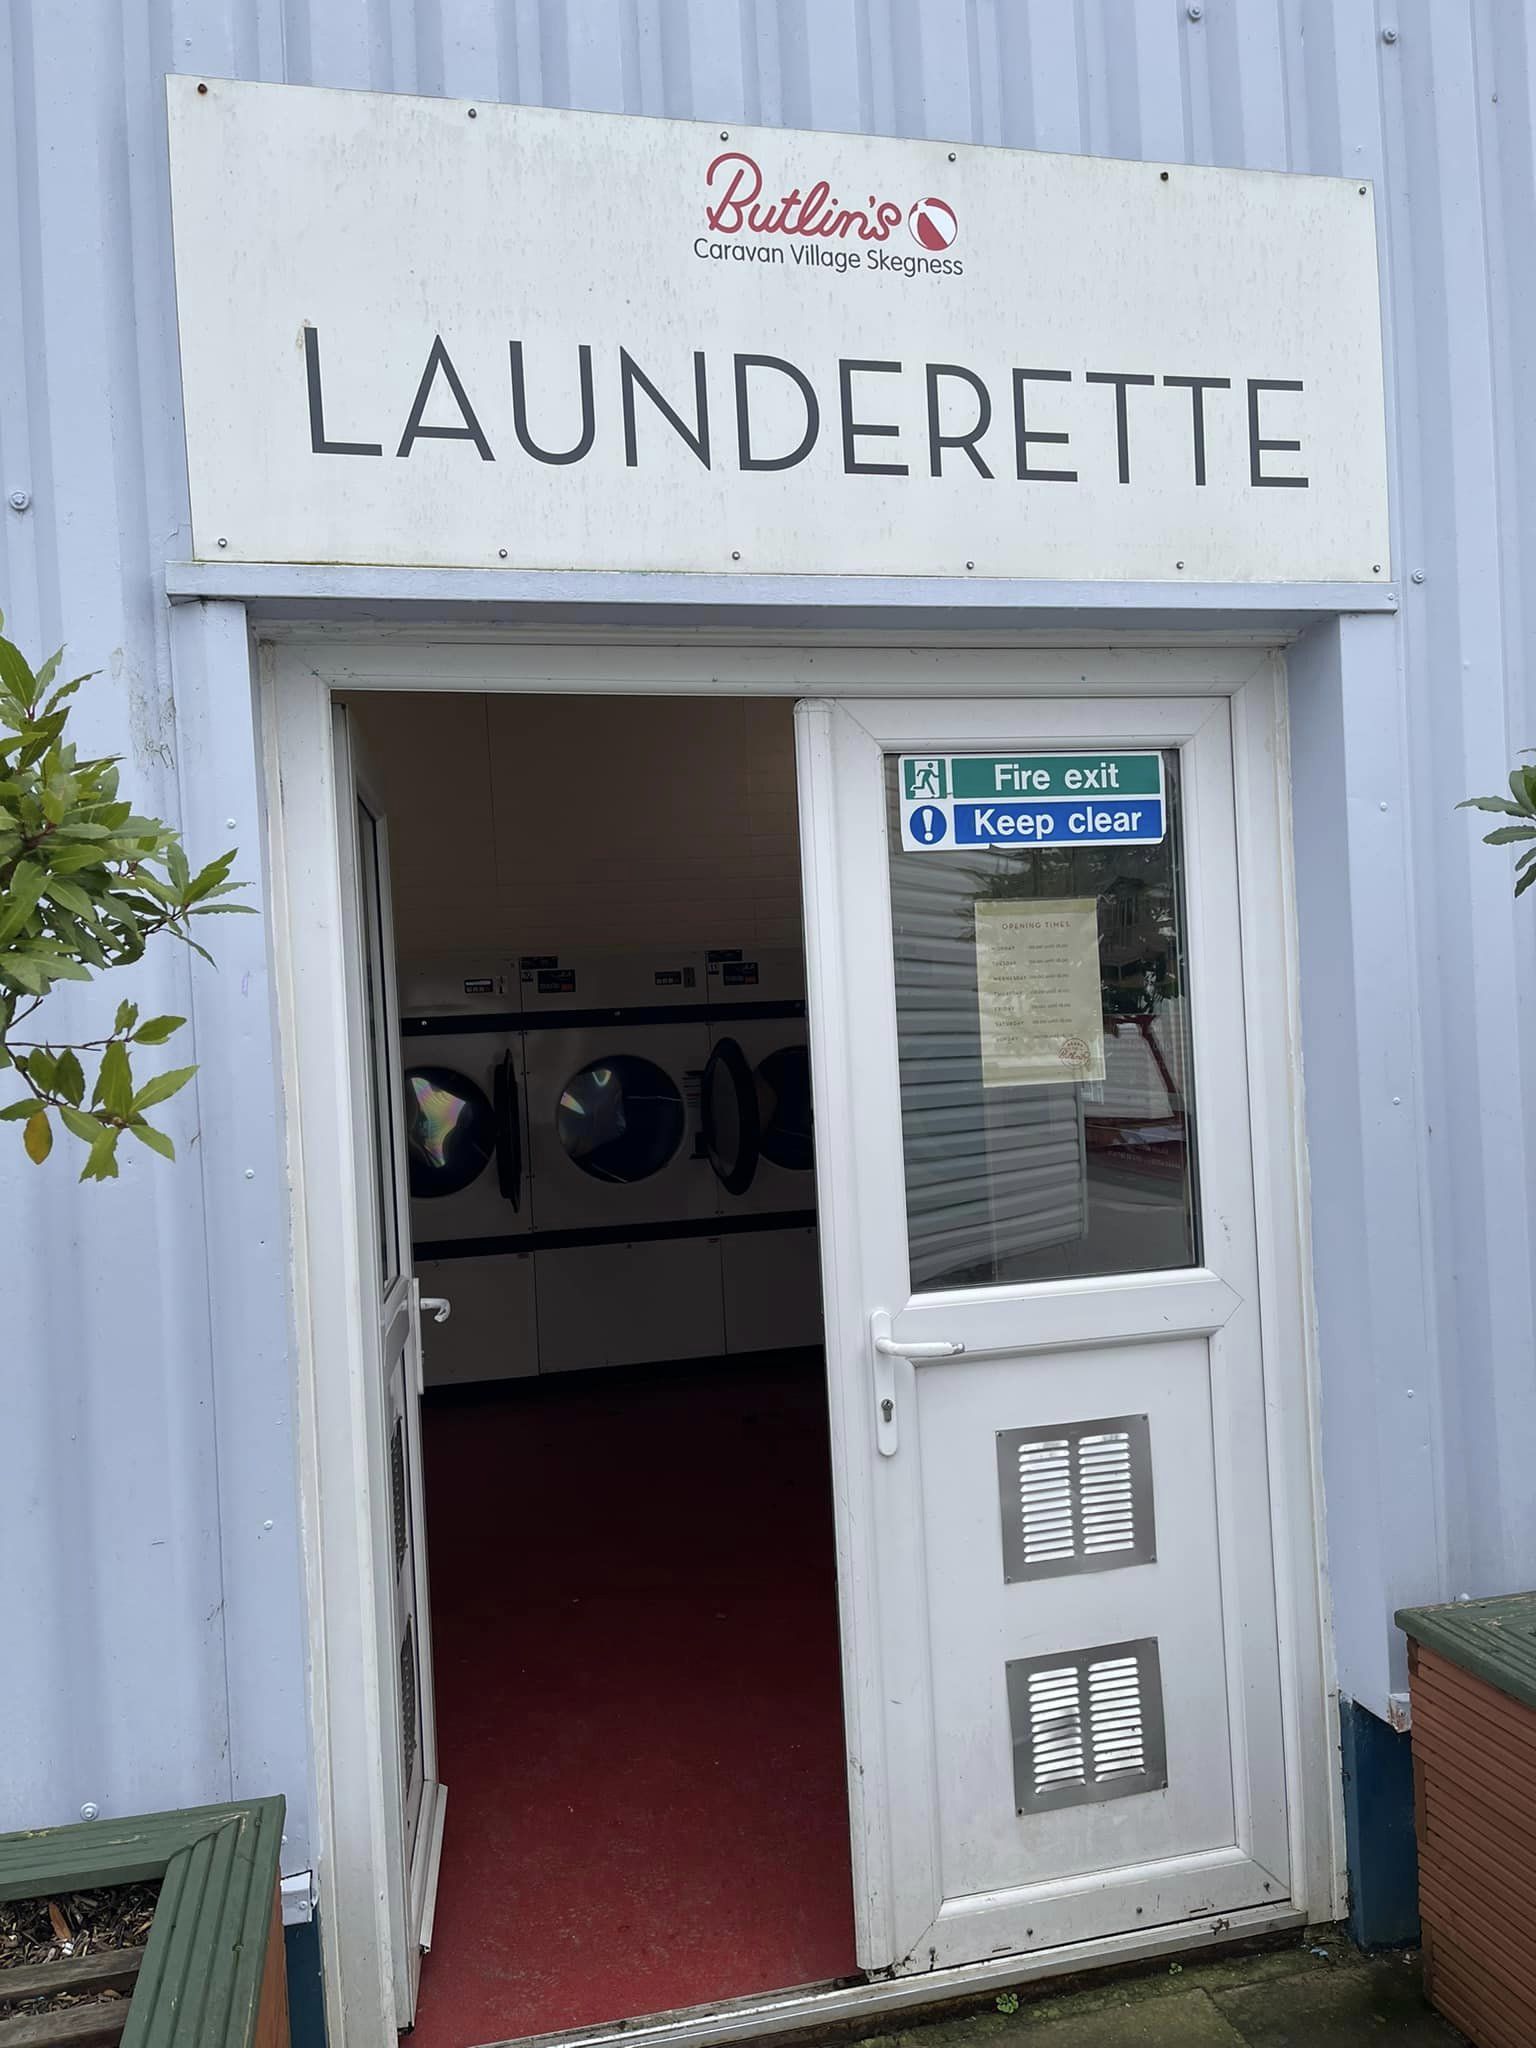 The Laundertte